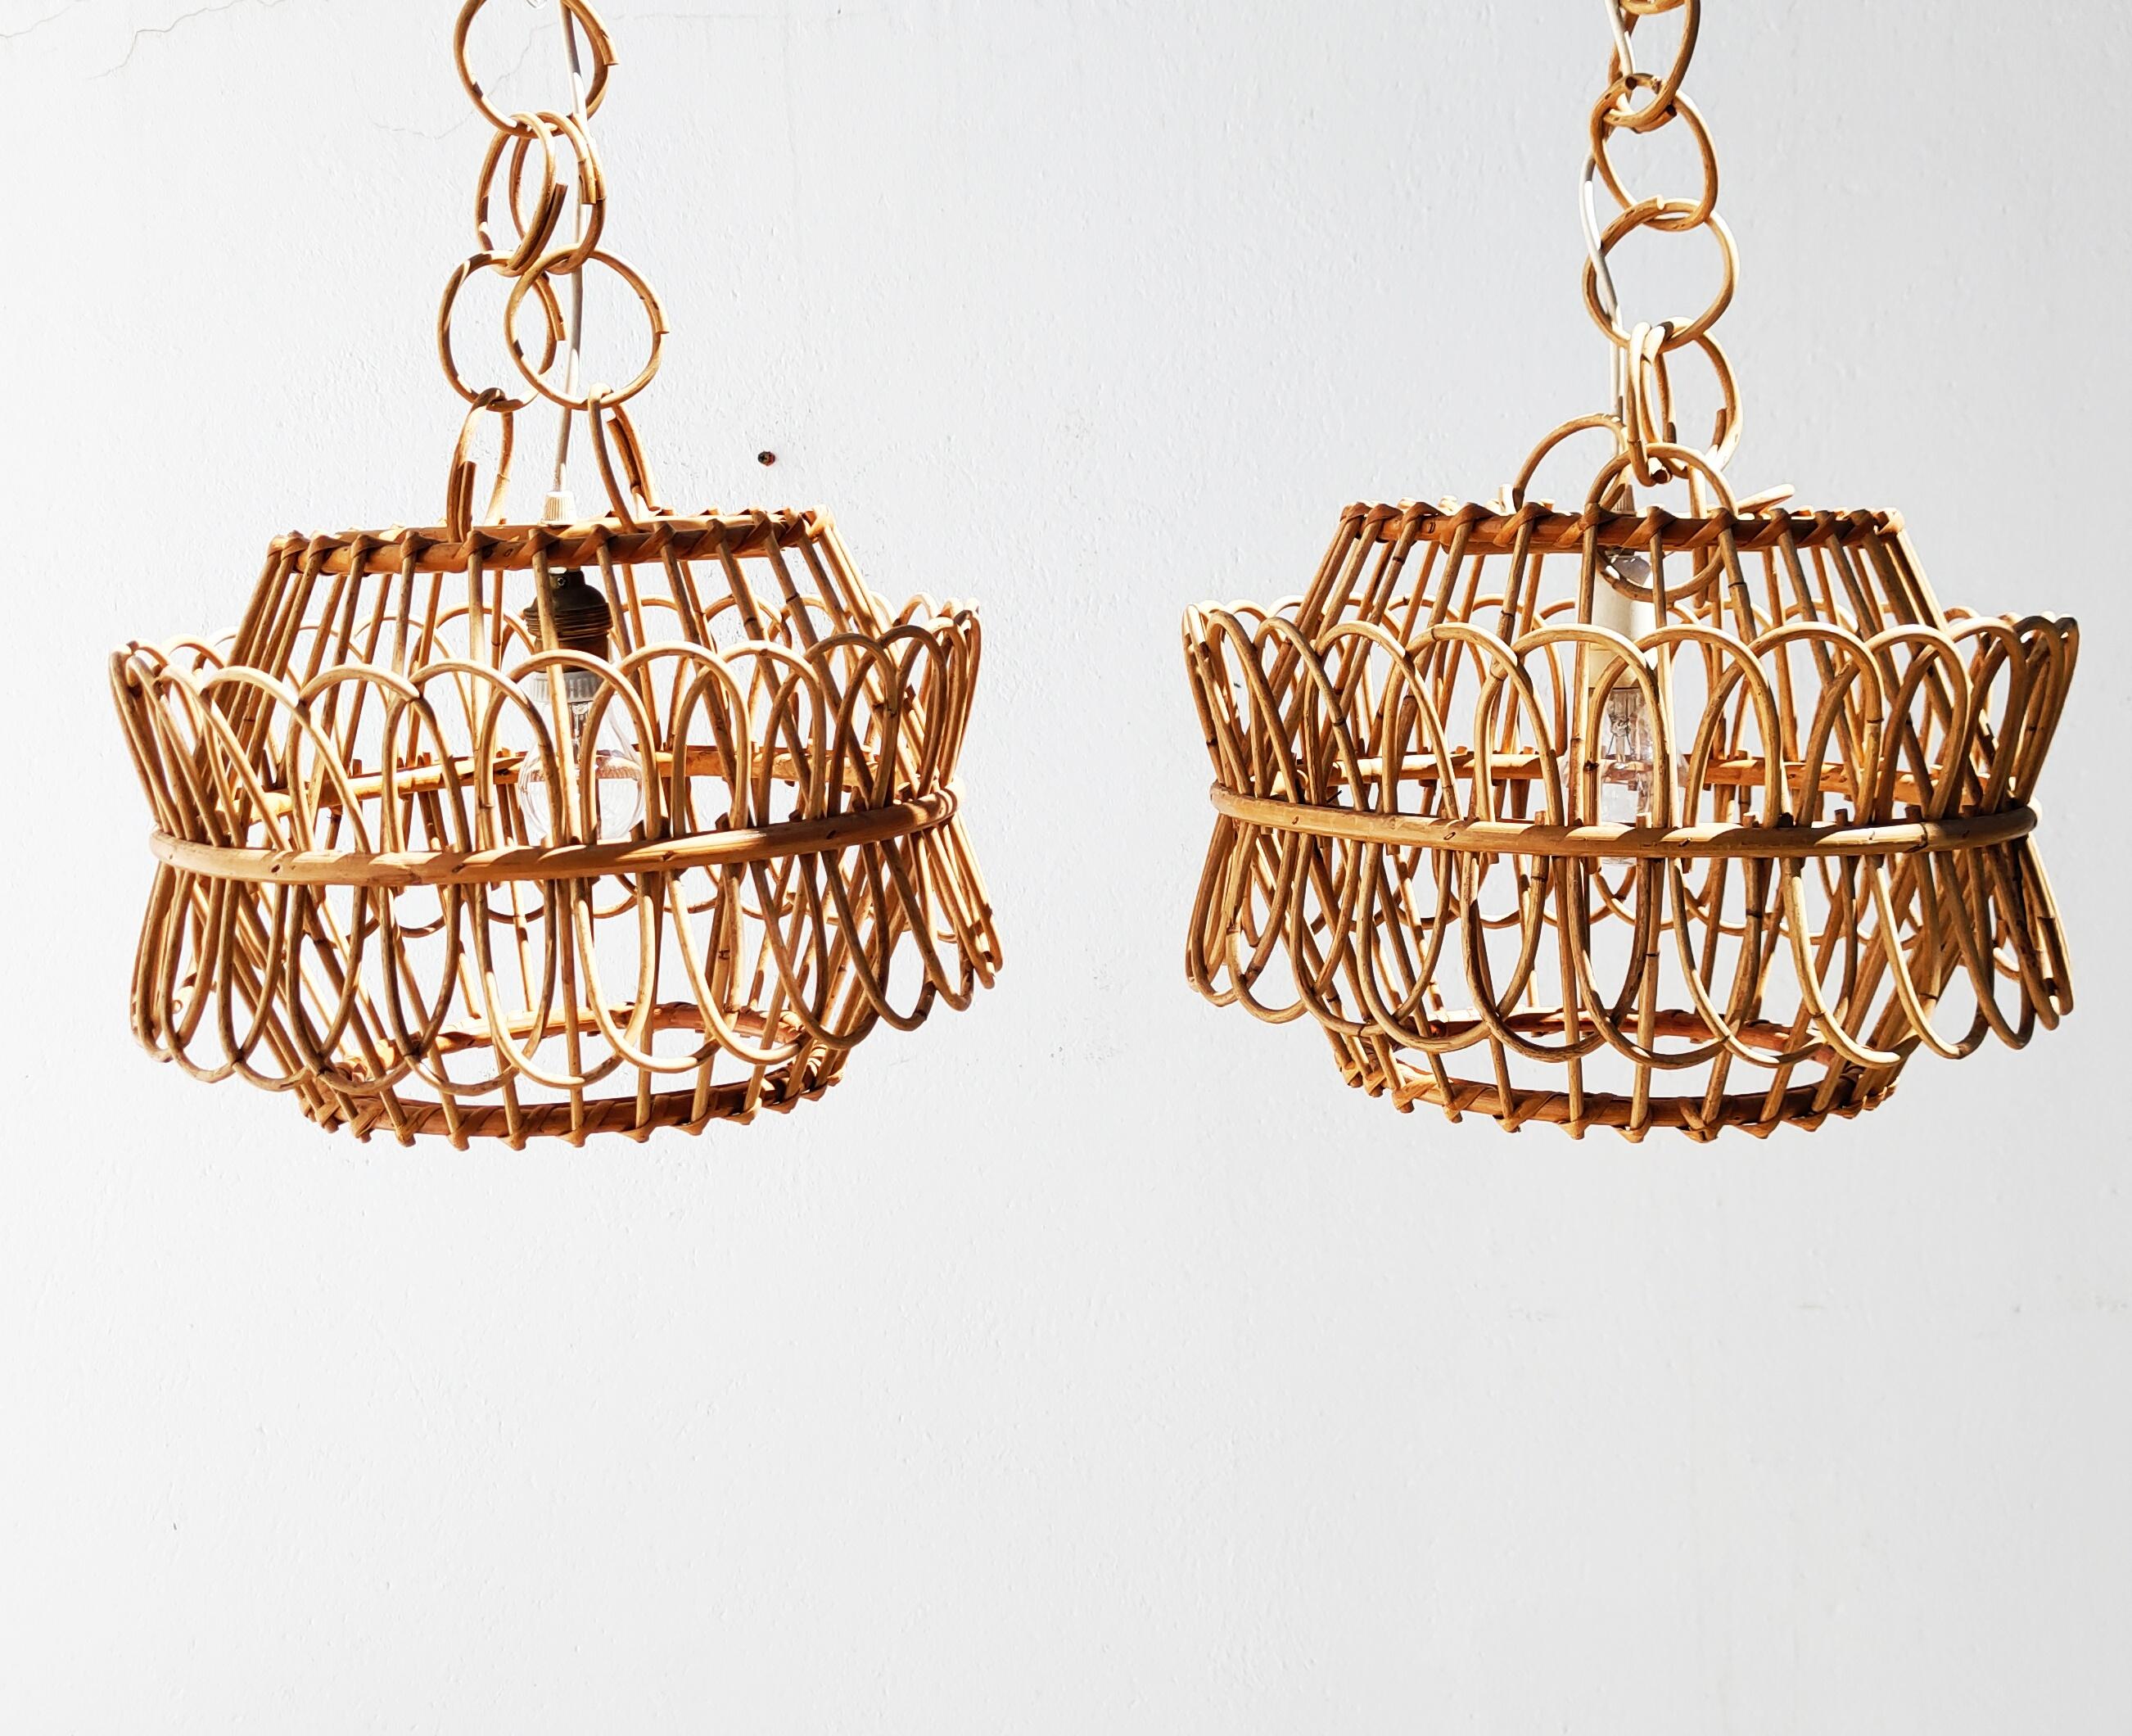 Rare and beautiful pair of rattan and bamboo chandelier manufactured in Spain in 1960s.
In perfect vintage condition.
The total height with the ceiling hanger is 90 cm adjustable.